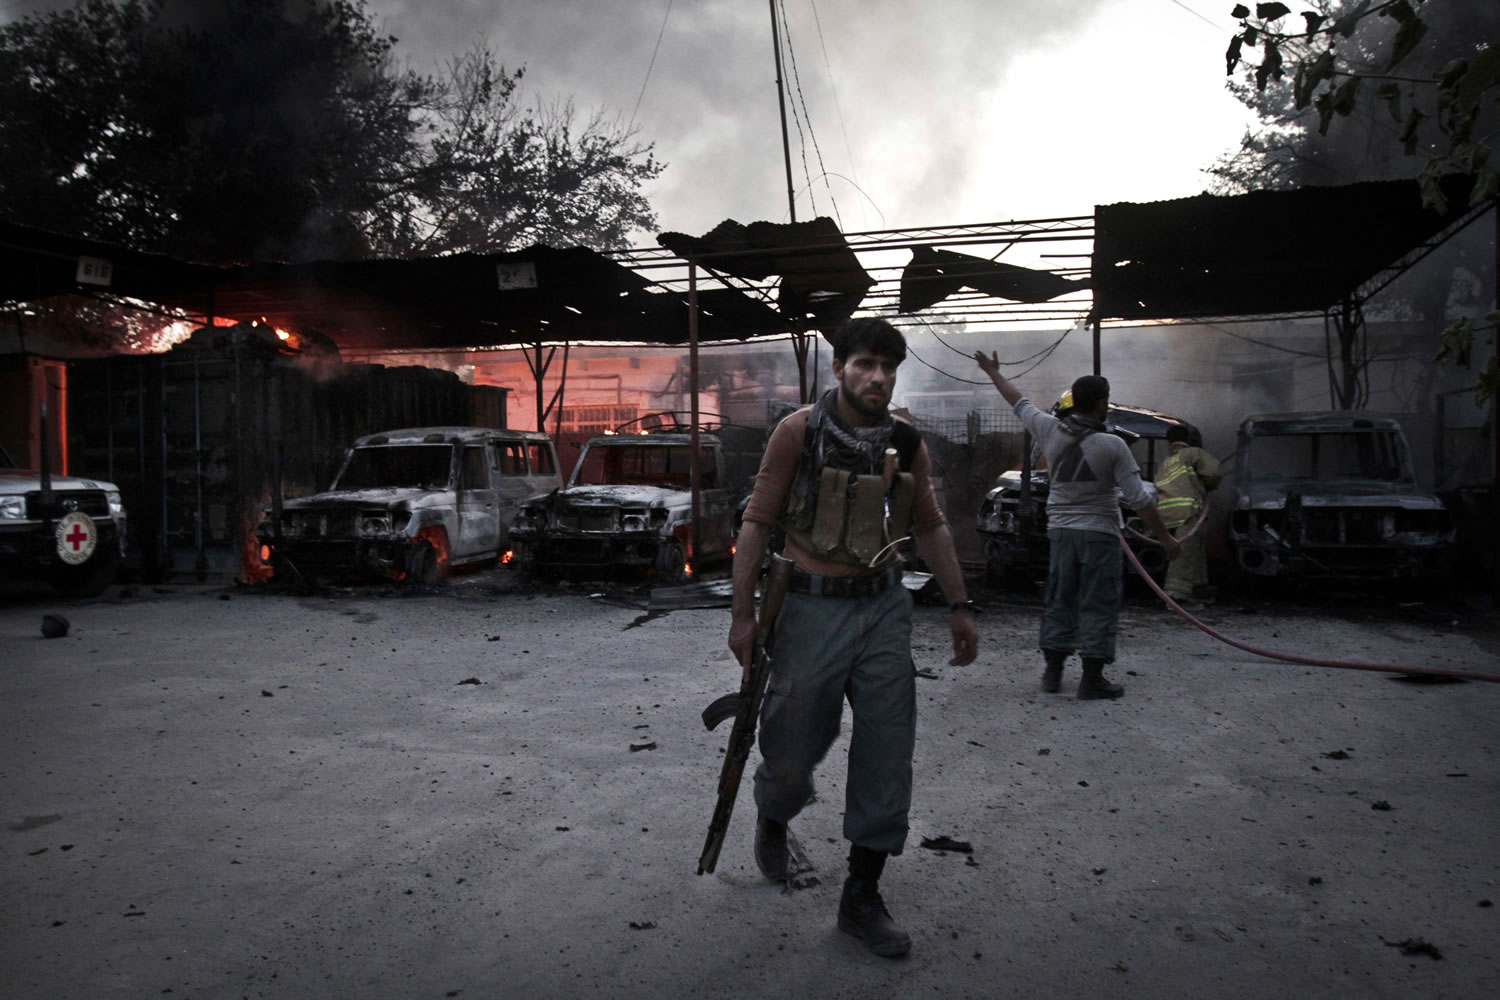 An Afghan policeman is seen at the burning International Red Cross building during a gun battle between security forces and an insurgent in Jalalabad east of Kabul, Afghanistan, on Wednesday.